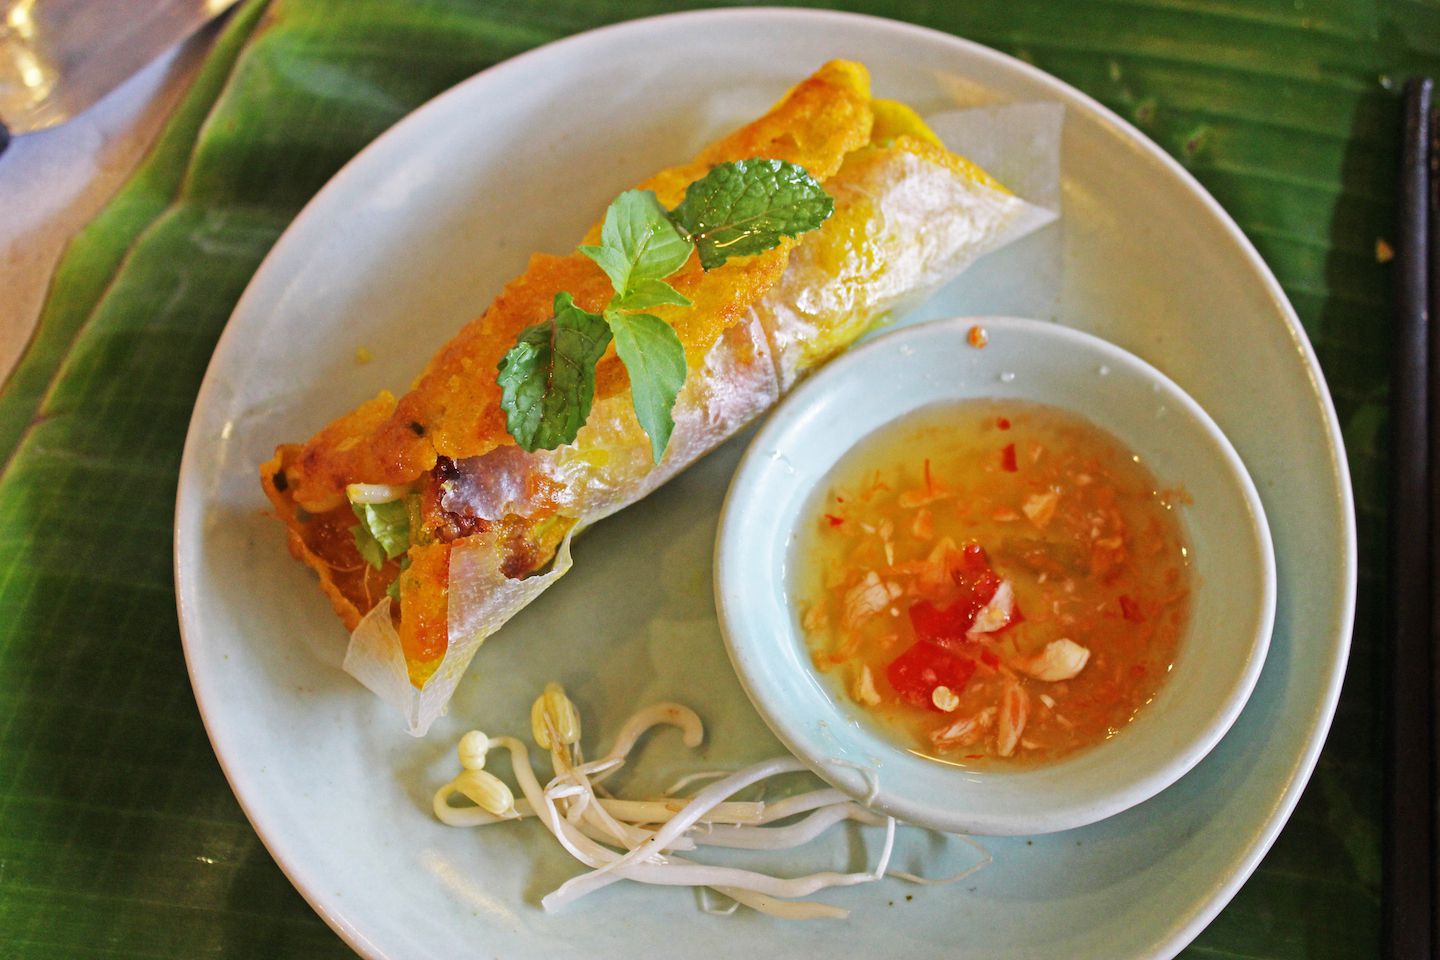 Rolled up Crispy Hoi An pancakes